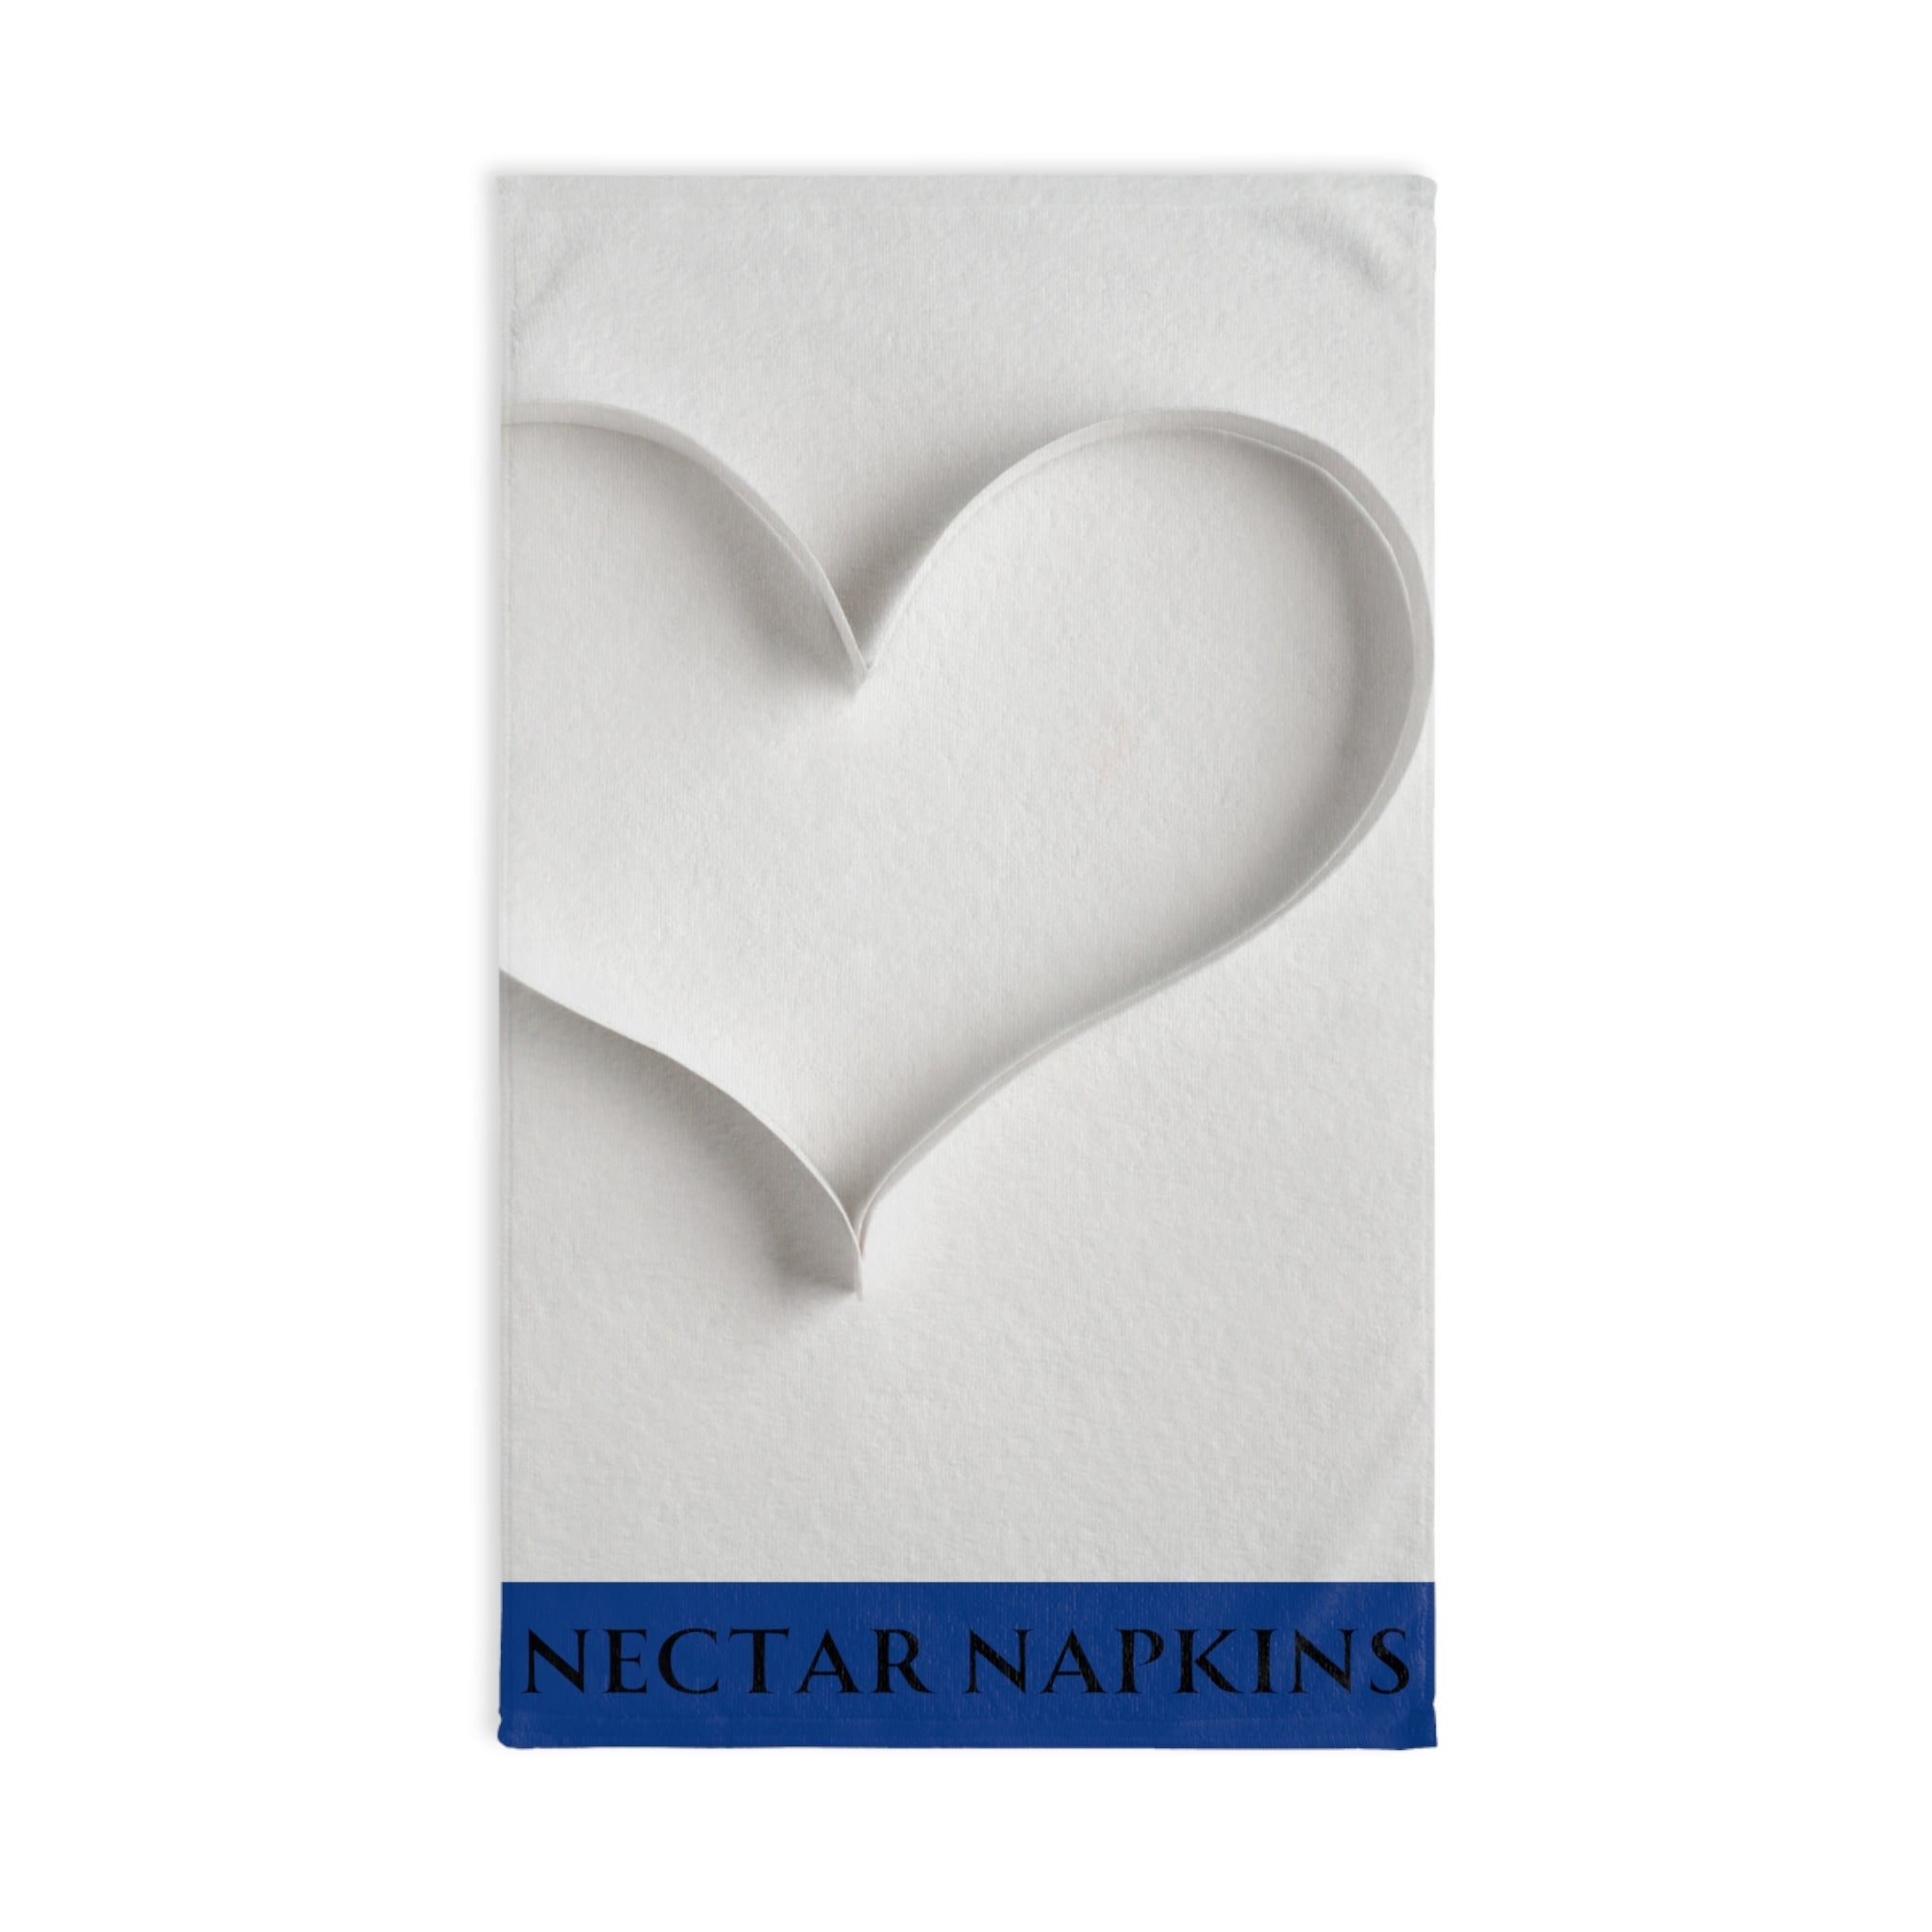 Paper Heart 3D Blue | Gifts for Boyfriend, Funny Towel Romantic Gift for Wedding Couple Fiance First Year Anniversary Valentines, Party Gag Gifts, Joke Humor Cloth for Husband Men BF NECTAR NAPKINS